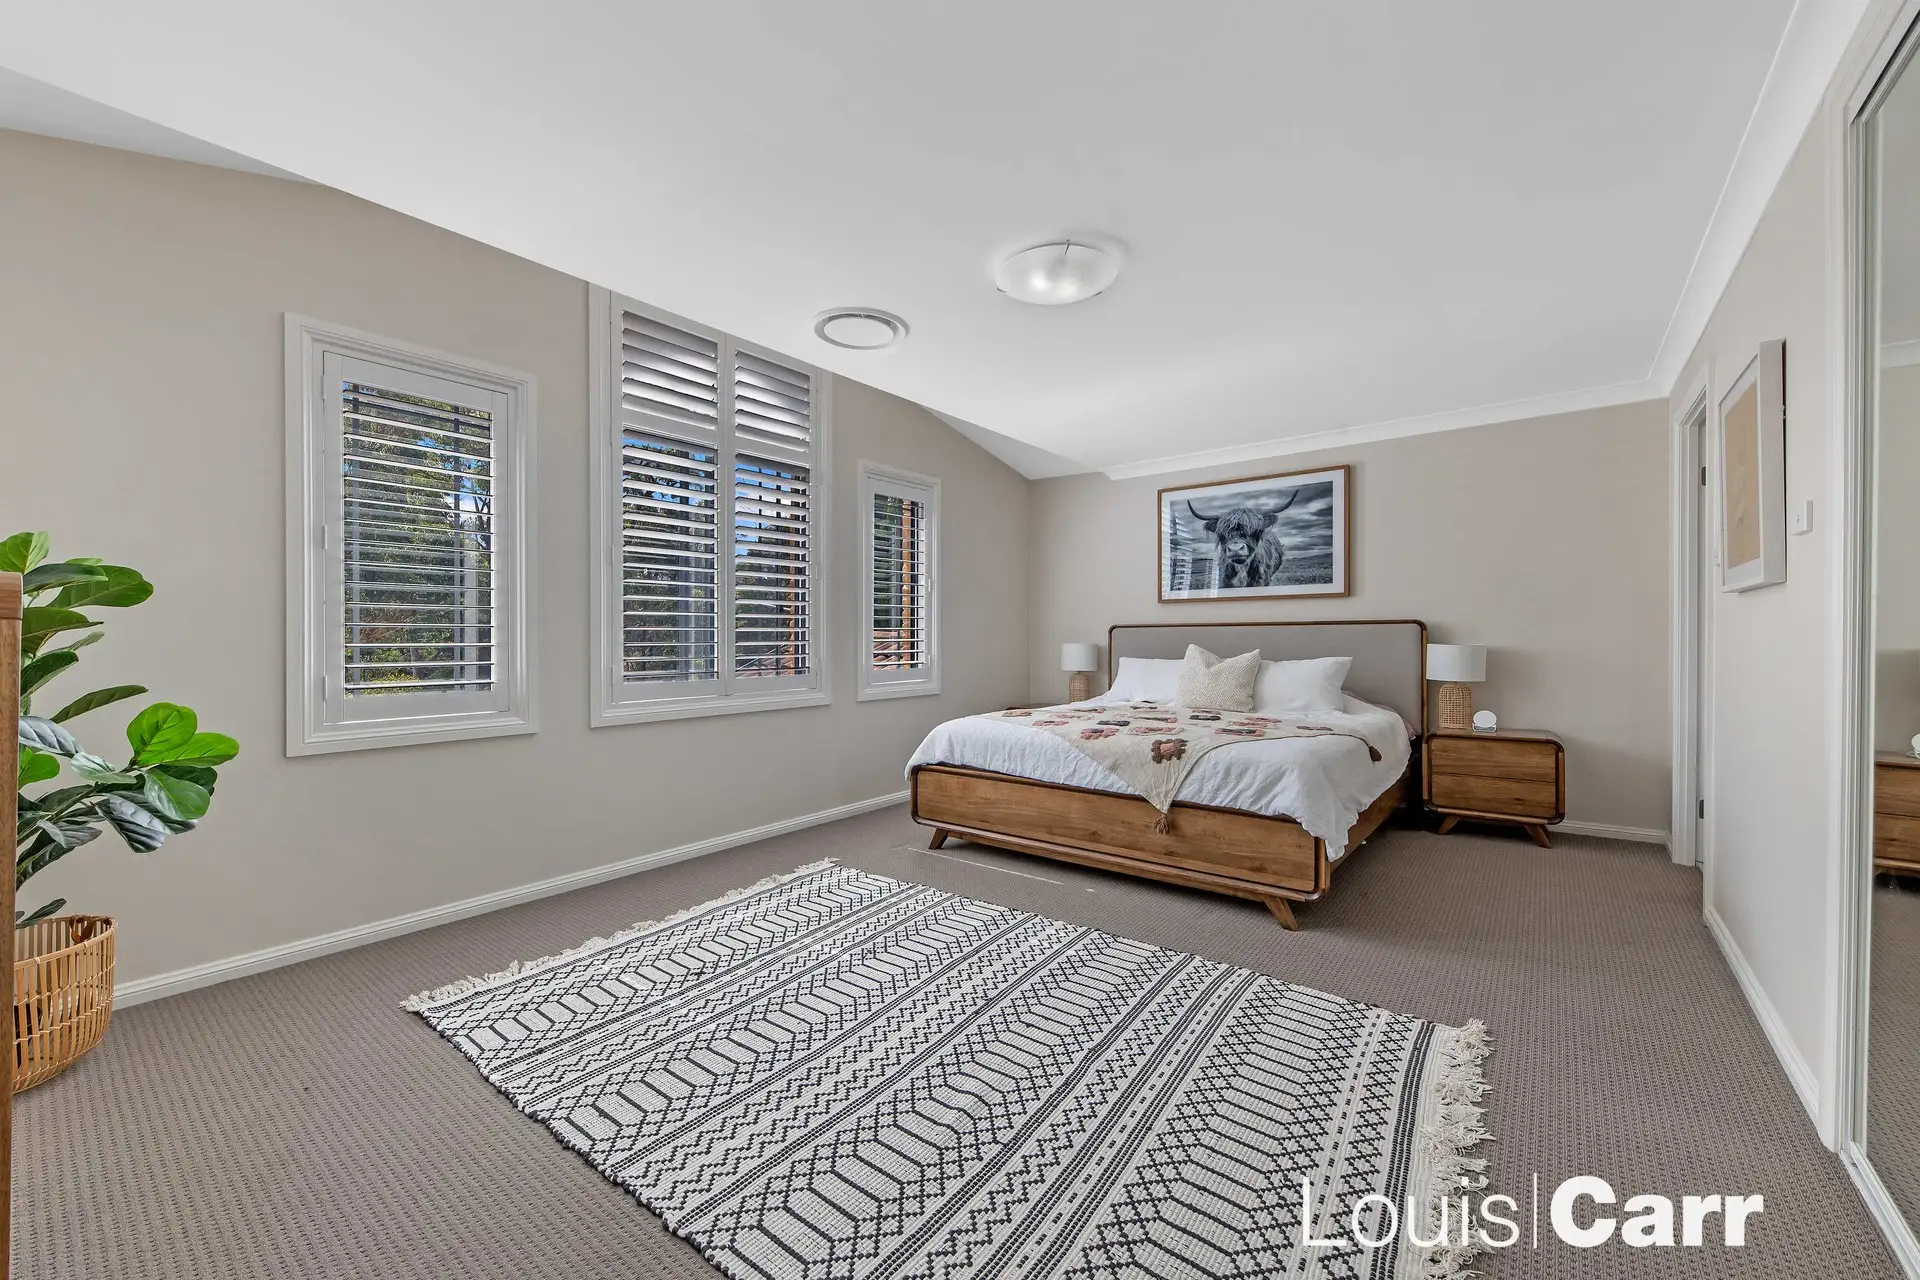 Photo #6: 23 Queensbury Avenue, Kellyville - Sold by Louis Carr Real Estate